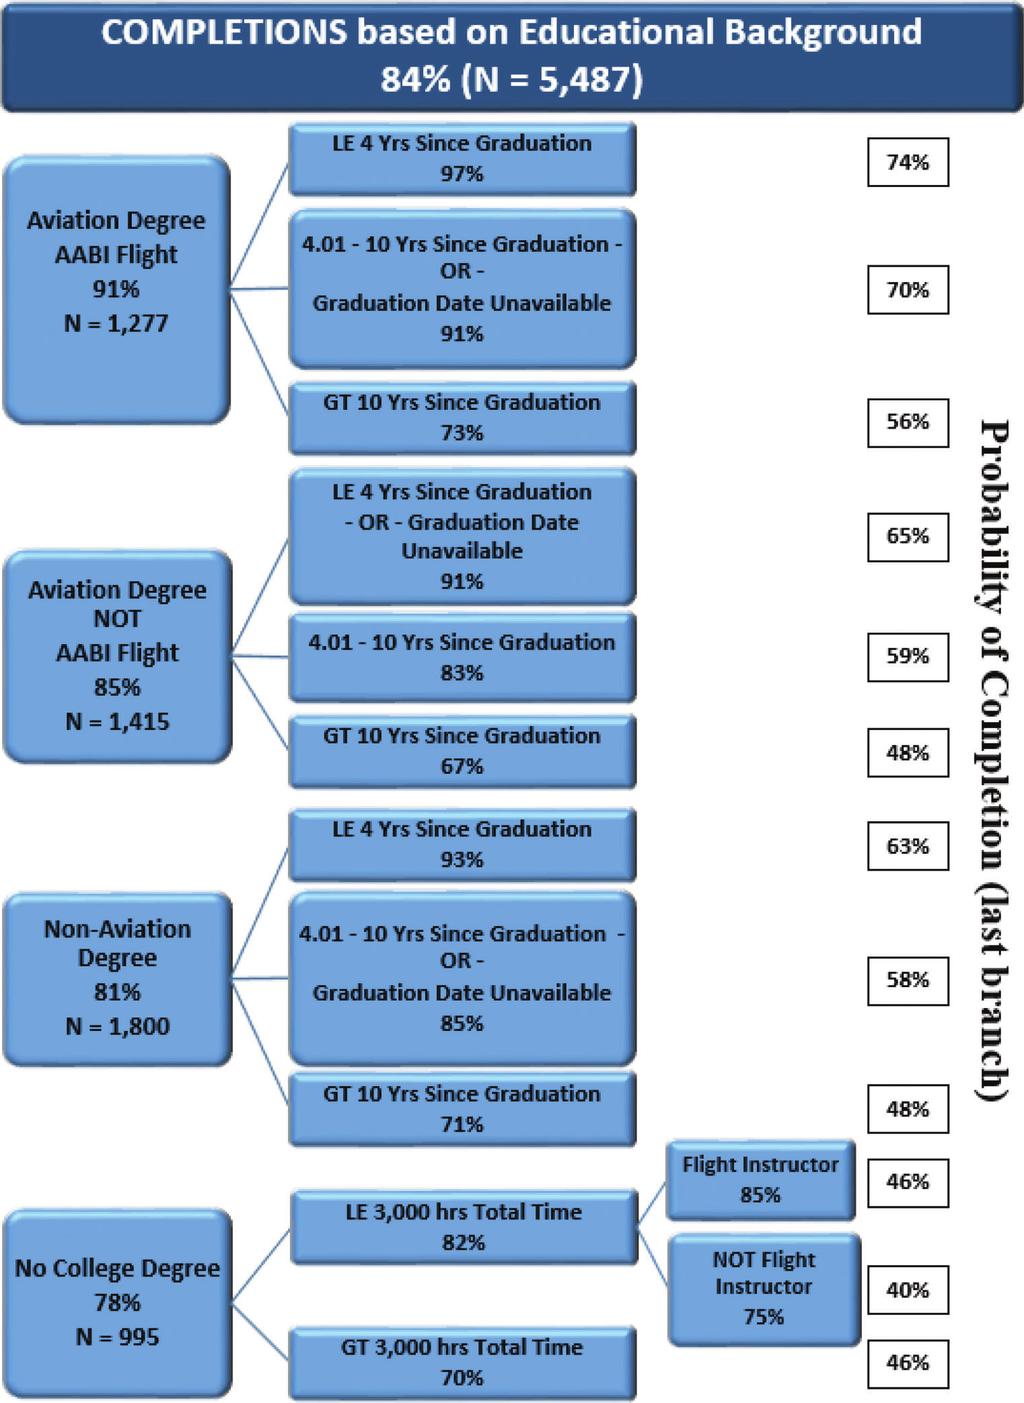 G. Smith et al. / Journal of Aviation Technology and Engineering 81 Figure 4. Tree diagram of Completions based on Educational Background variables.